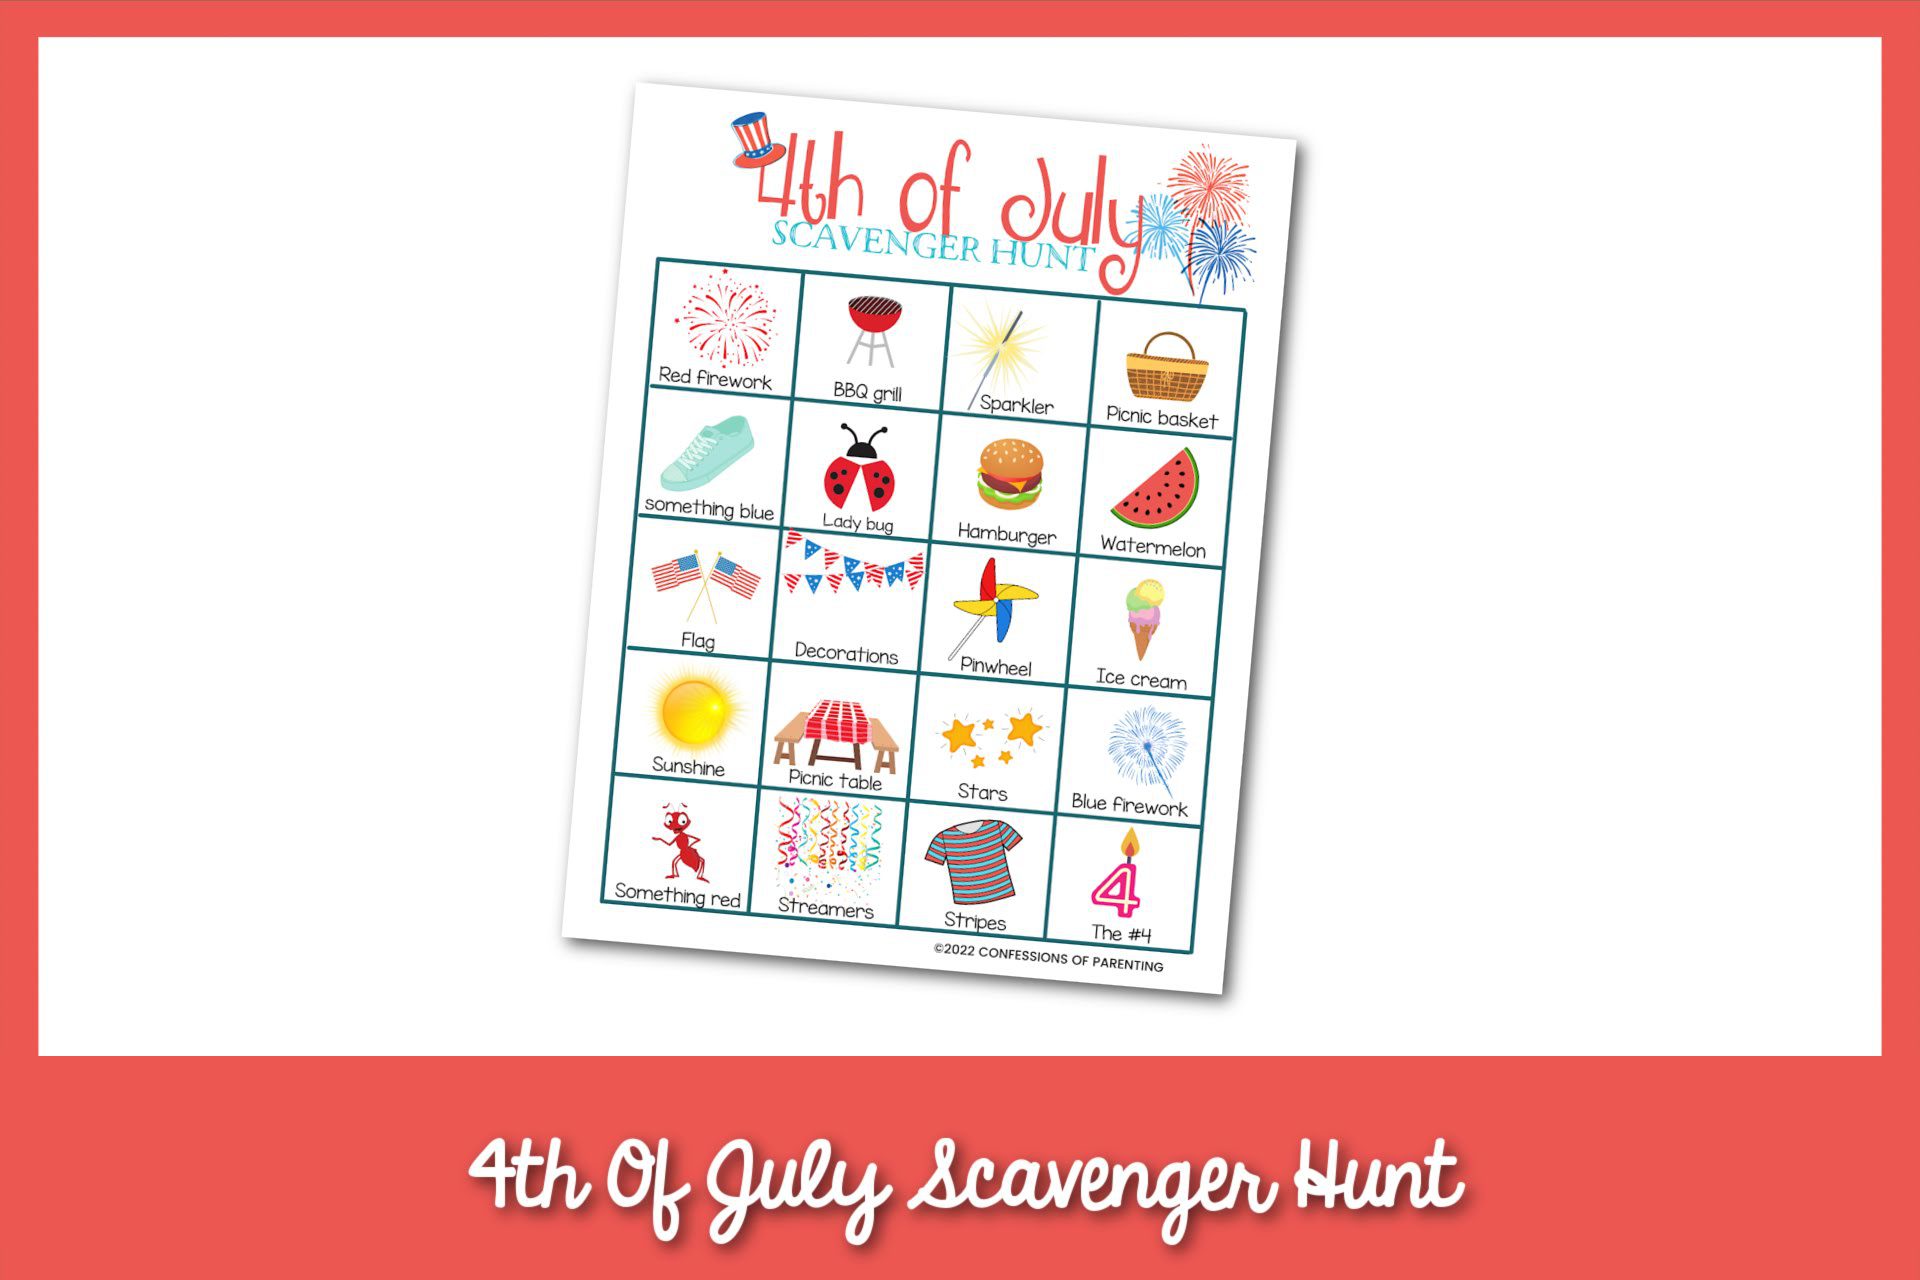 feature image: 4th of july scavenger hunt card printable with red border